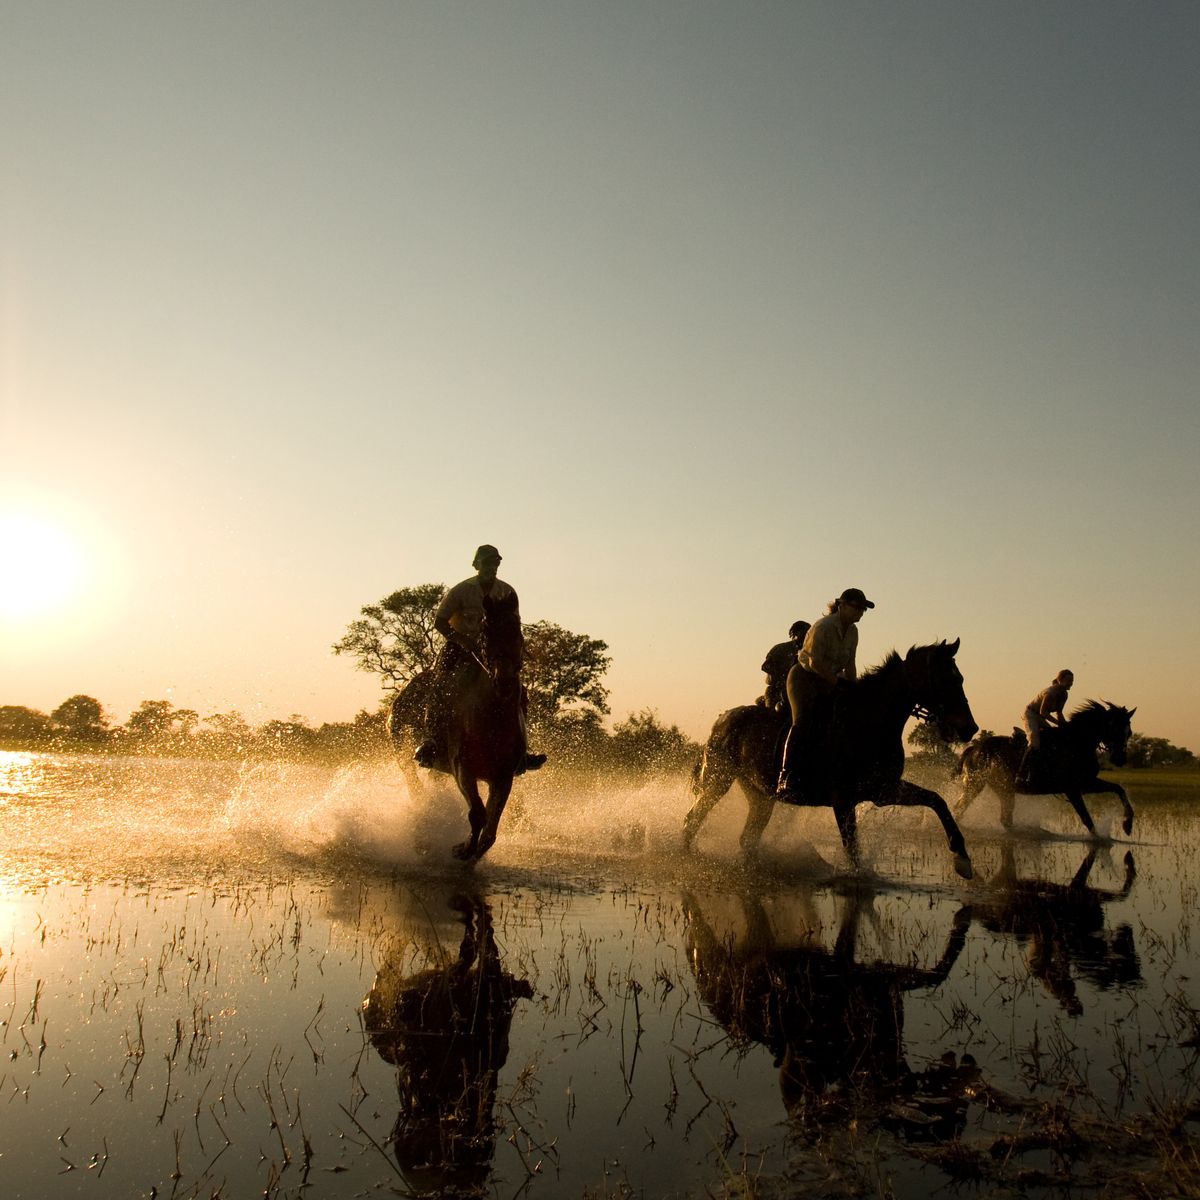 Human, Reflection, Wetland, People in nature, Working animal, Pack animal, Rein, Marsh, Horse supplies, Horse, 